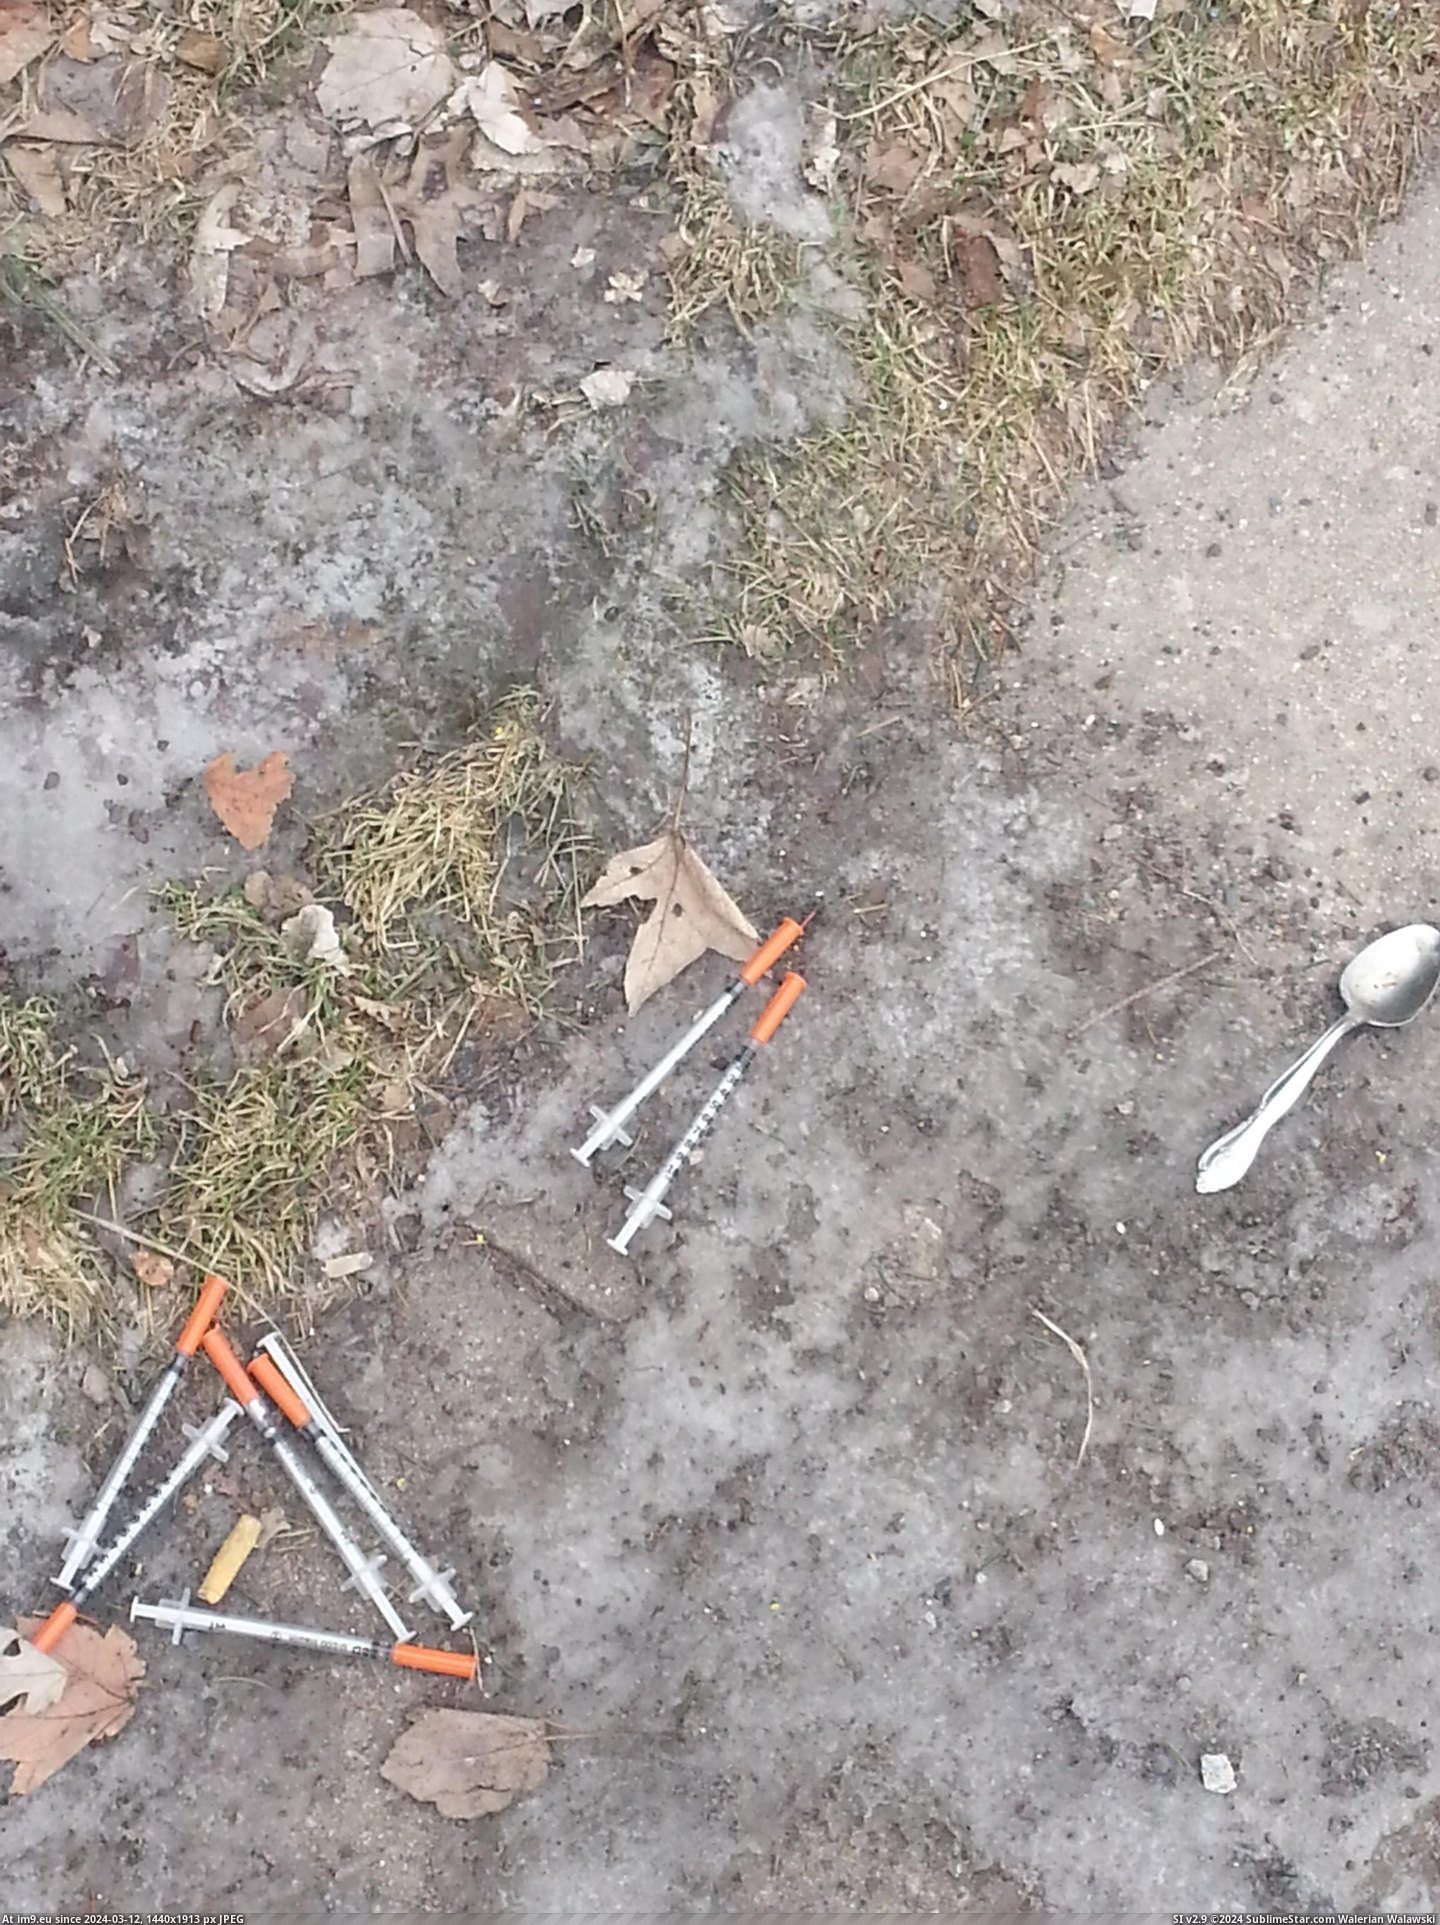 #Wtf #Eating #Cereal #Diabetic #Syringes #Lost #Poor [Wtf] Some poor diabetic seems to have lost his syringes while eating cereal Pic. (Obraz z album My r/WTF favs))